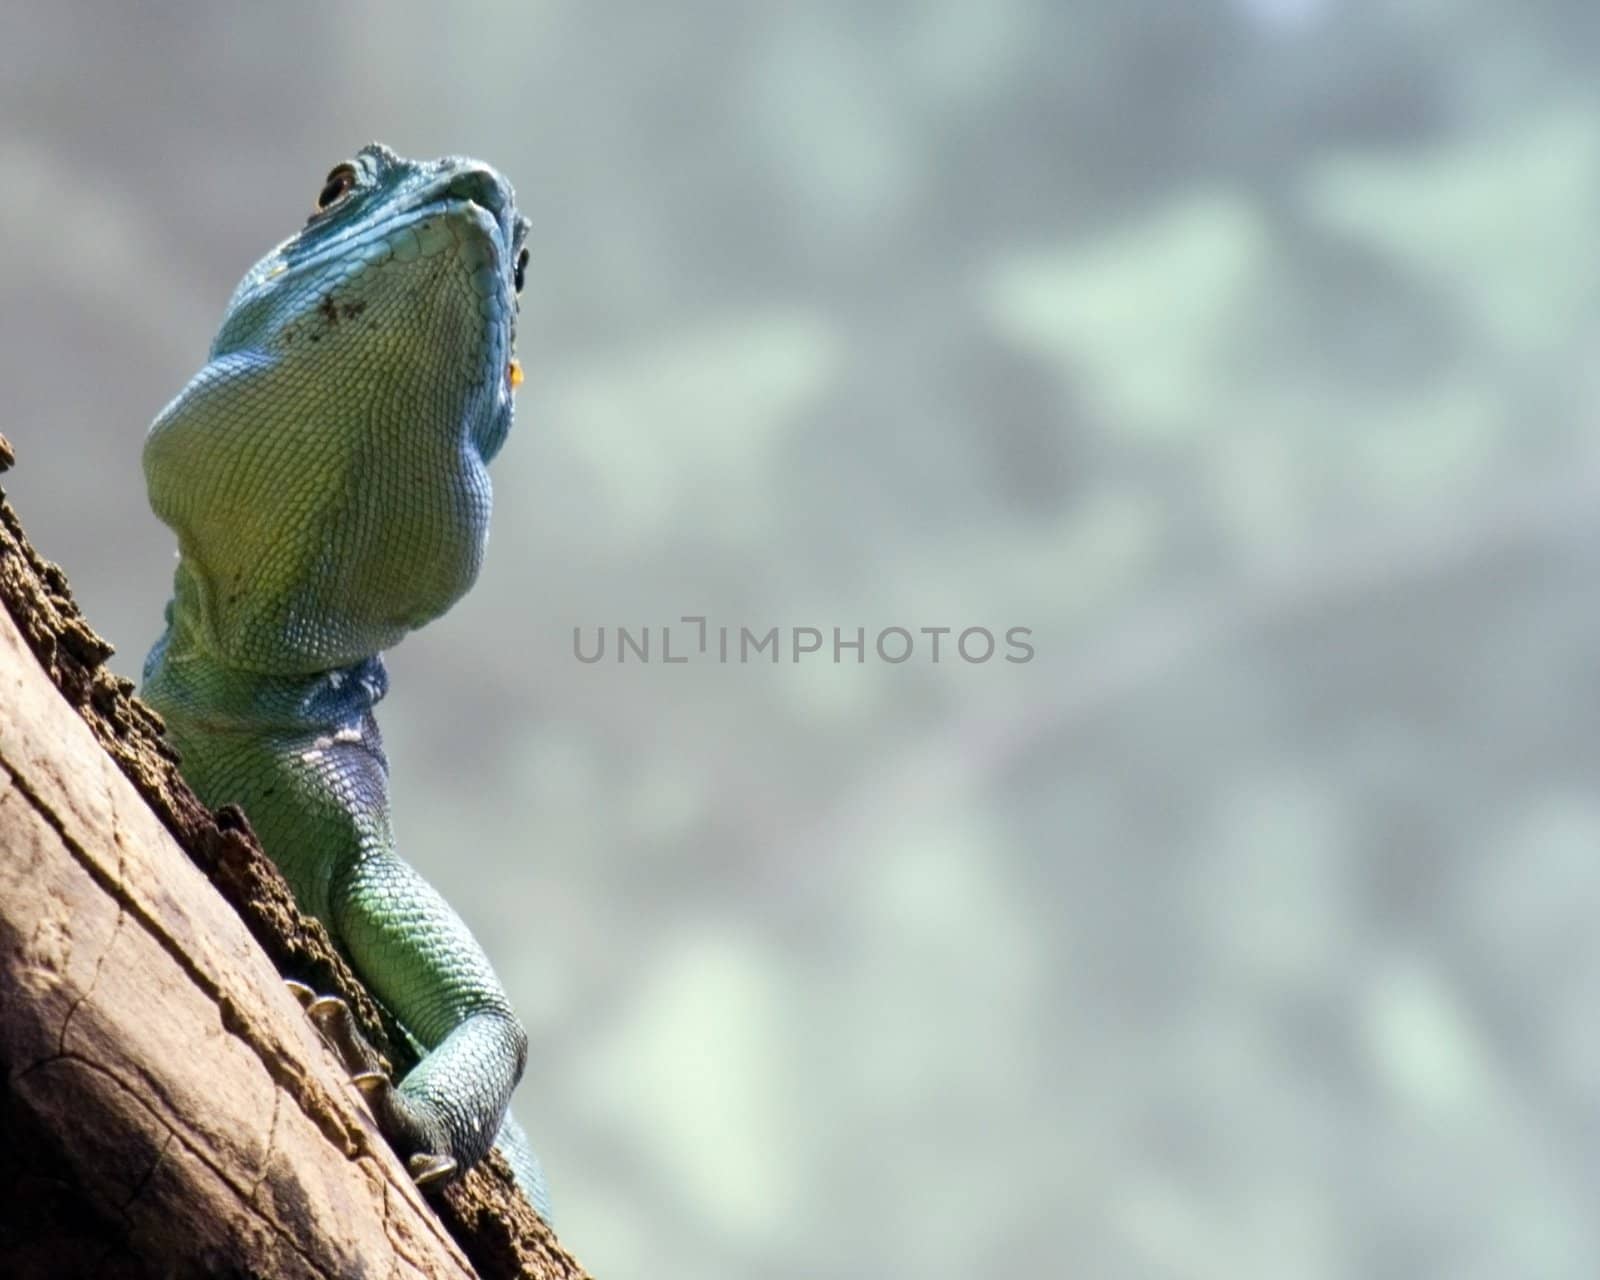 A lizard perched on a tree branch.